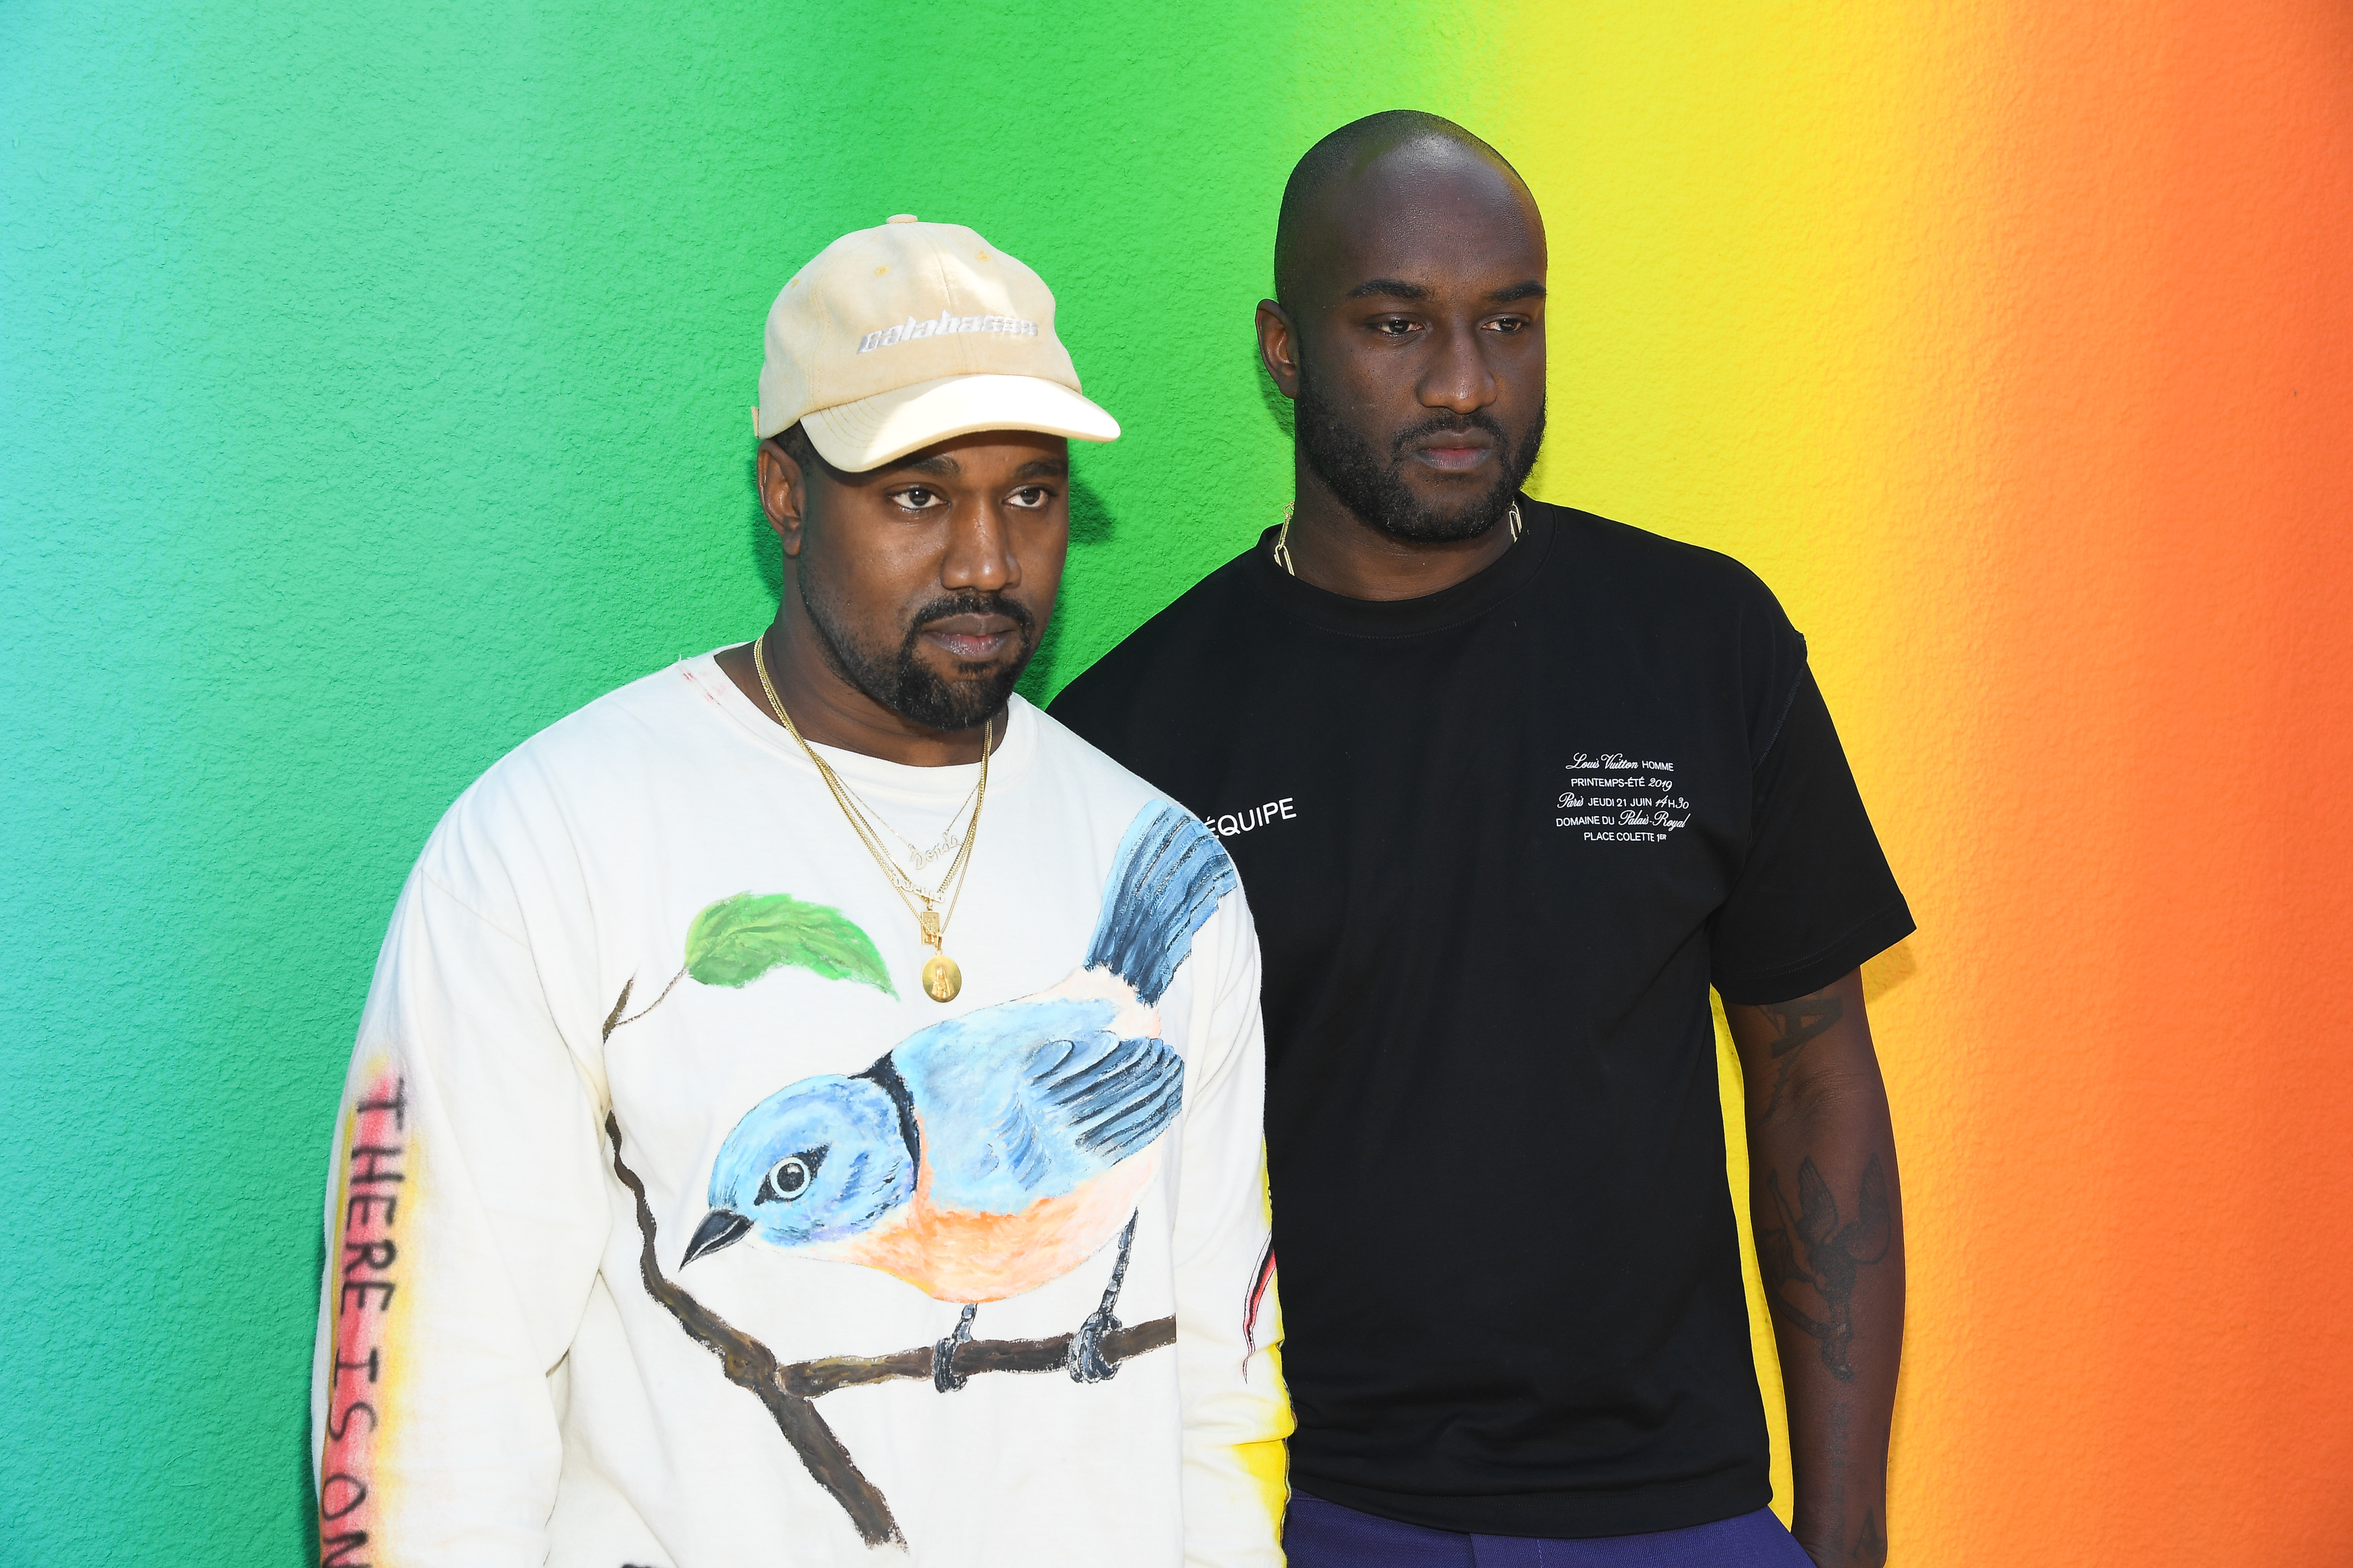 virgil abloh discusses the most important moment of his career so far